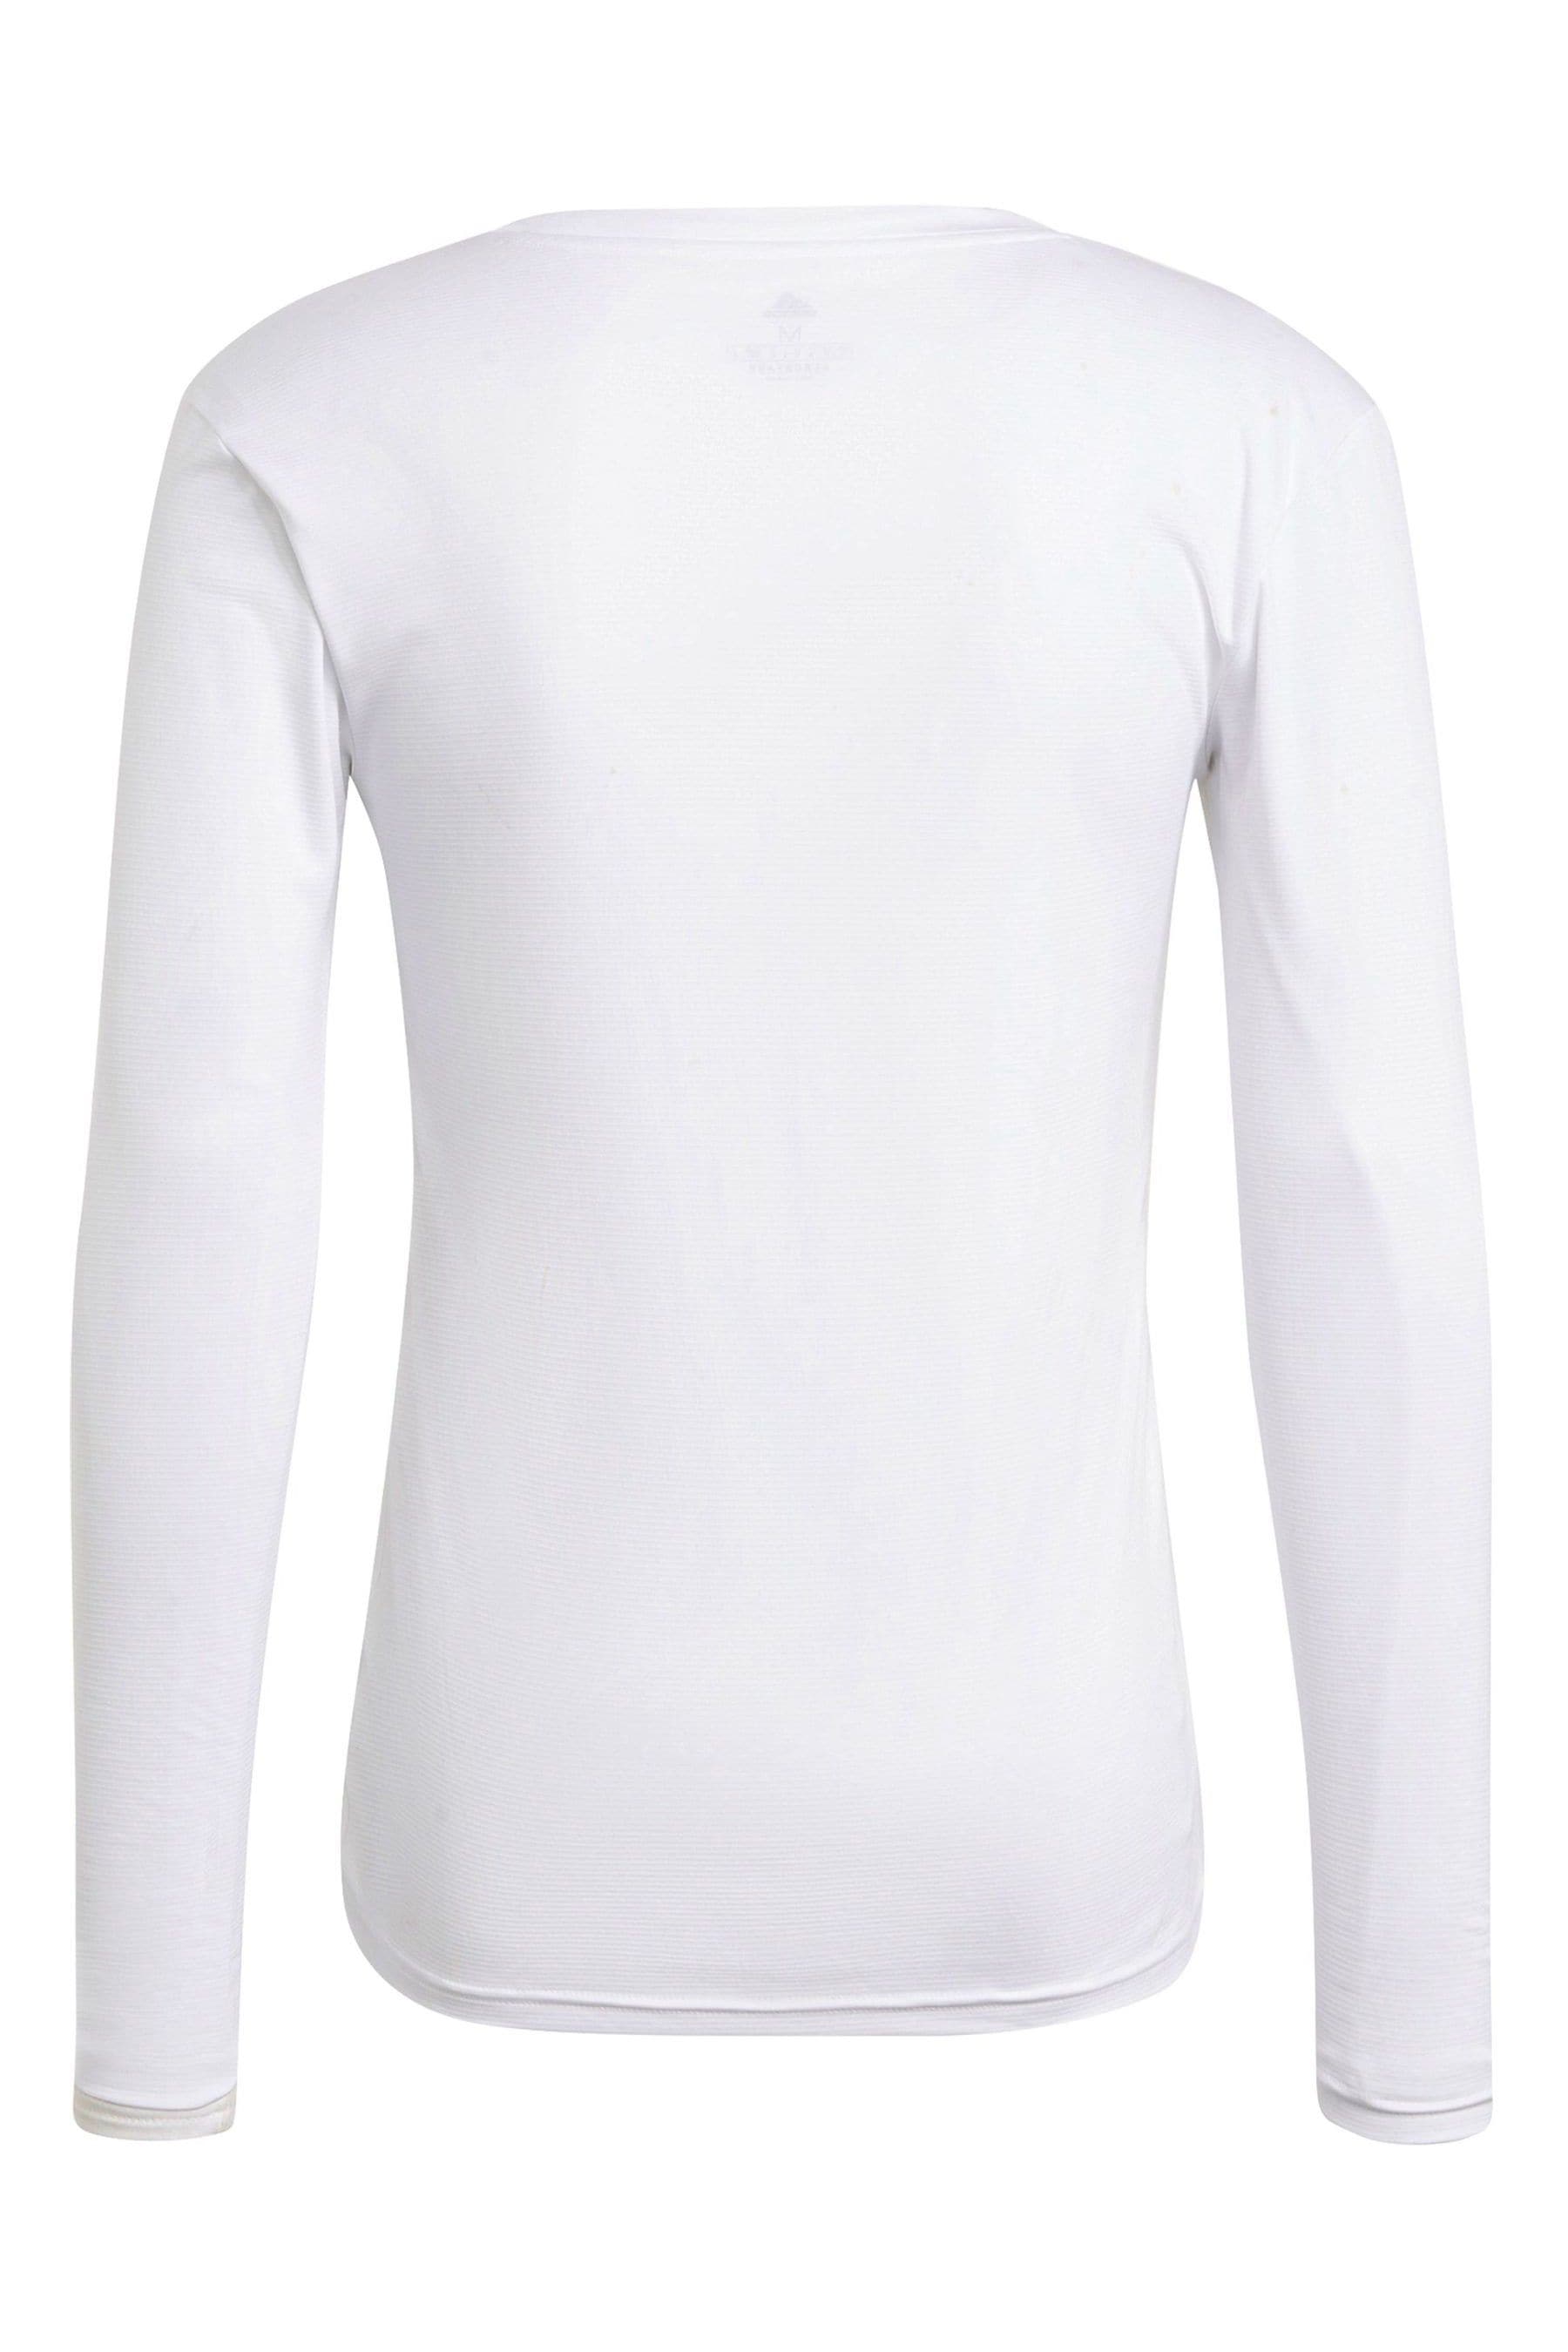 Buy adidas White Teamwear Base Layer Long Sleeve Top from the Next UK ...